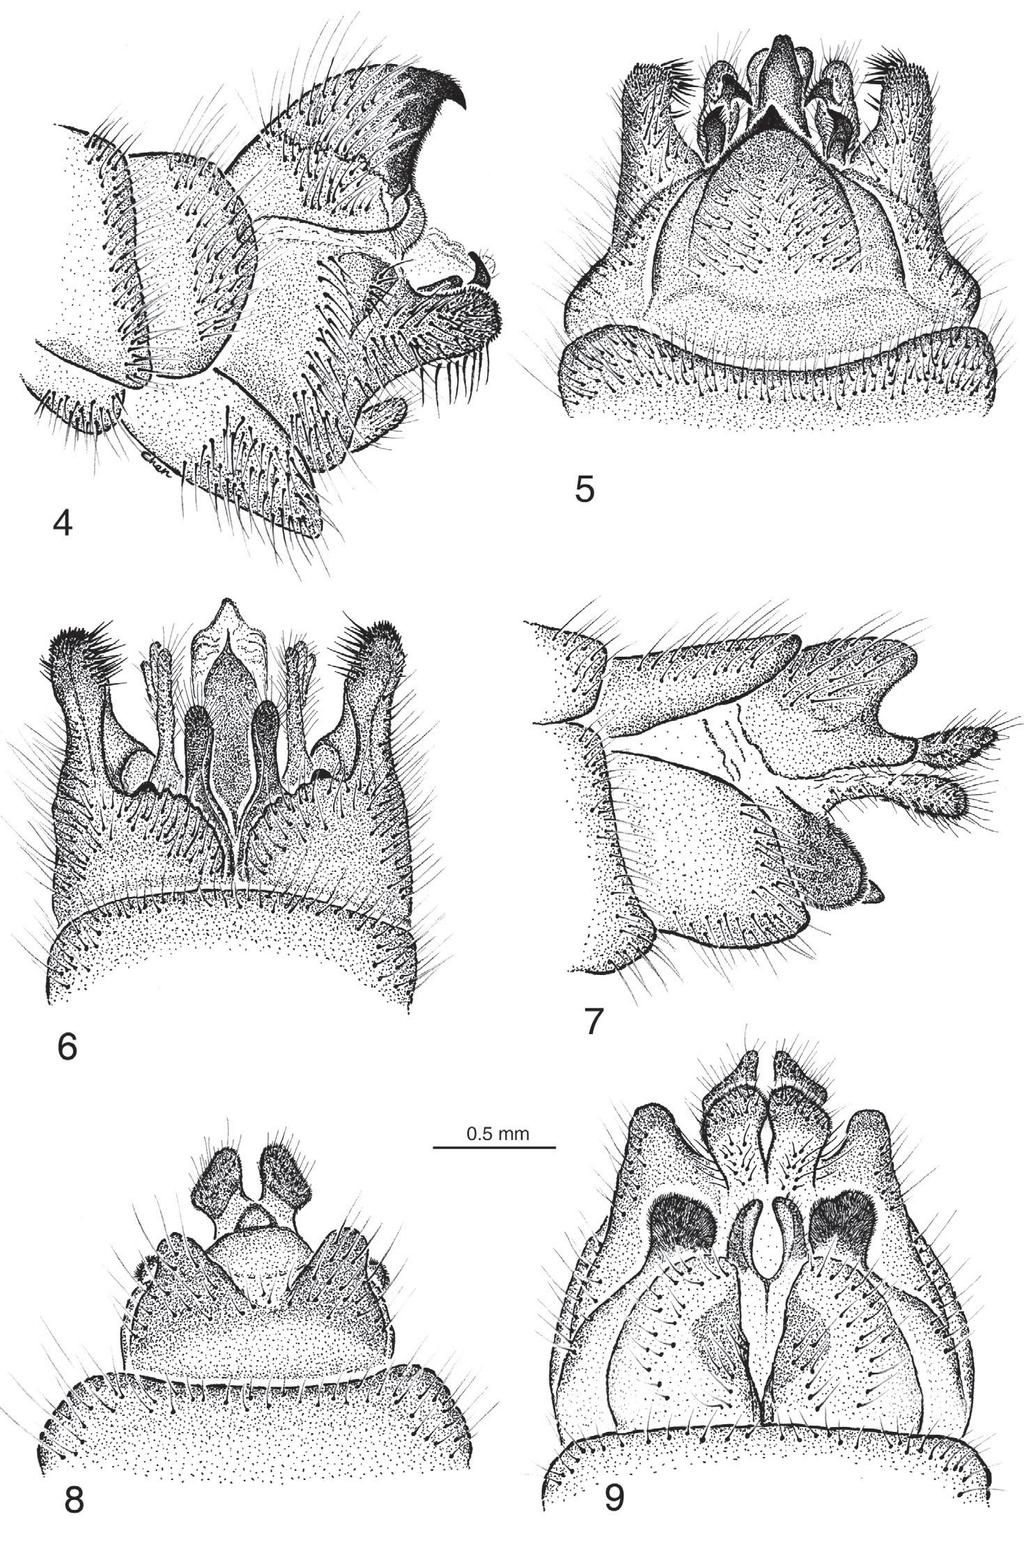 NEW SPECIES AND BIOLOGY OF TAIWANESE